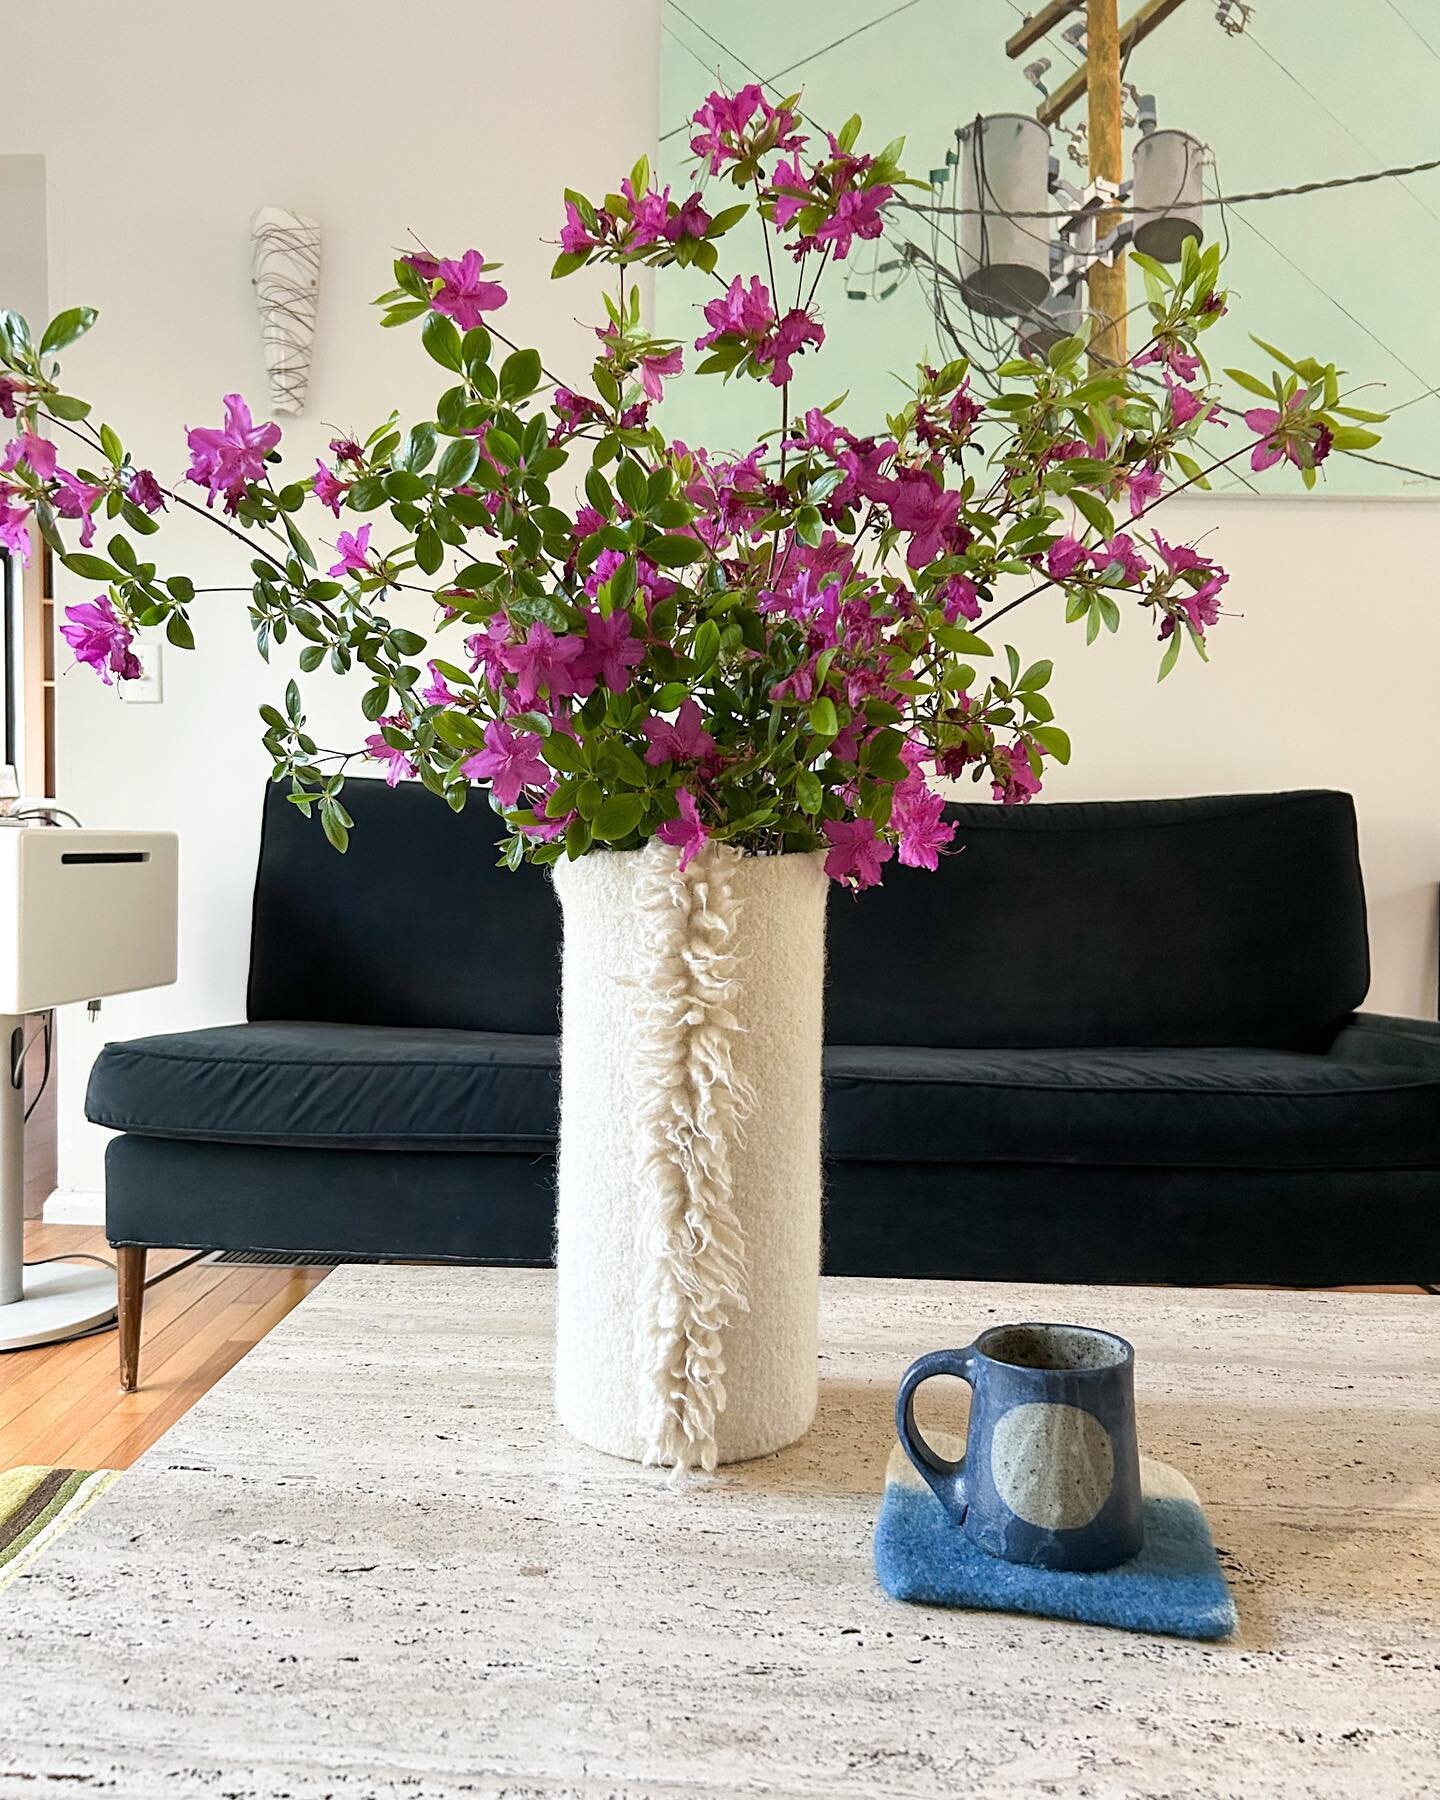 Taking advantage of the annual shrub trimming away from the house to put some azaleas in my giant fringe vase. (Coffee cup for comparison.)